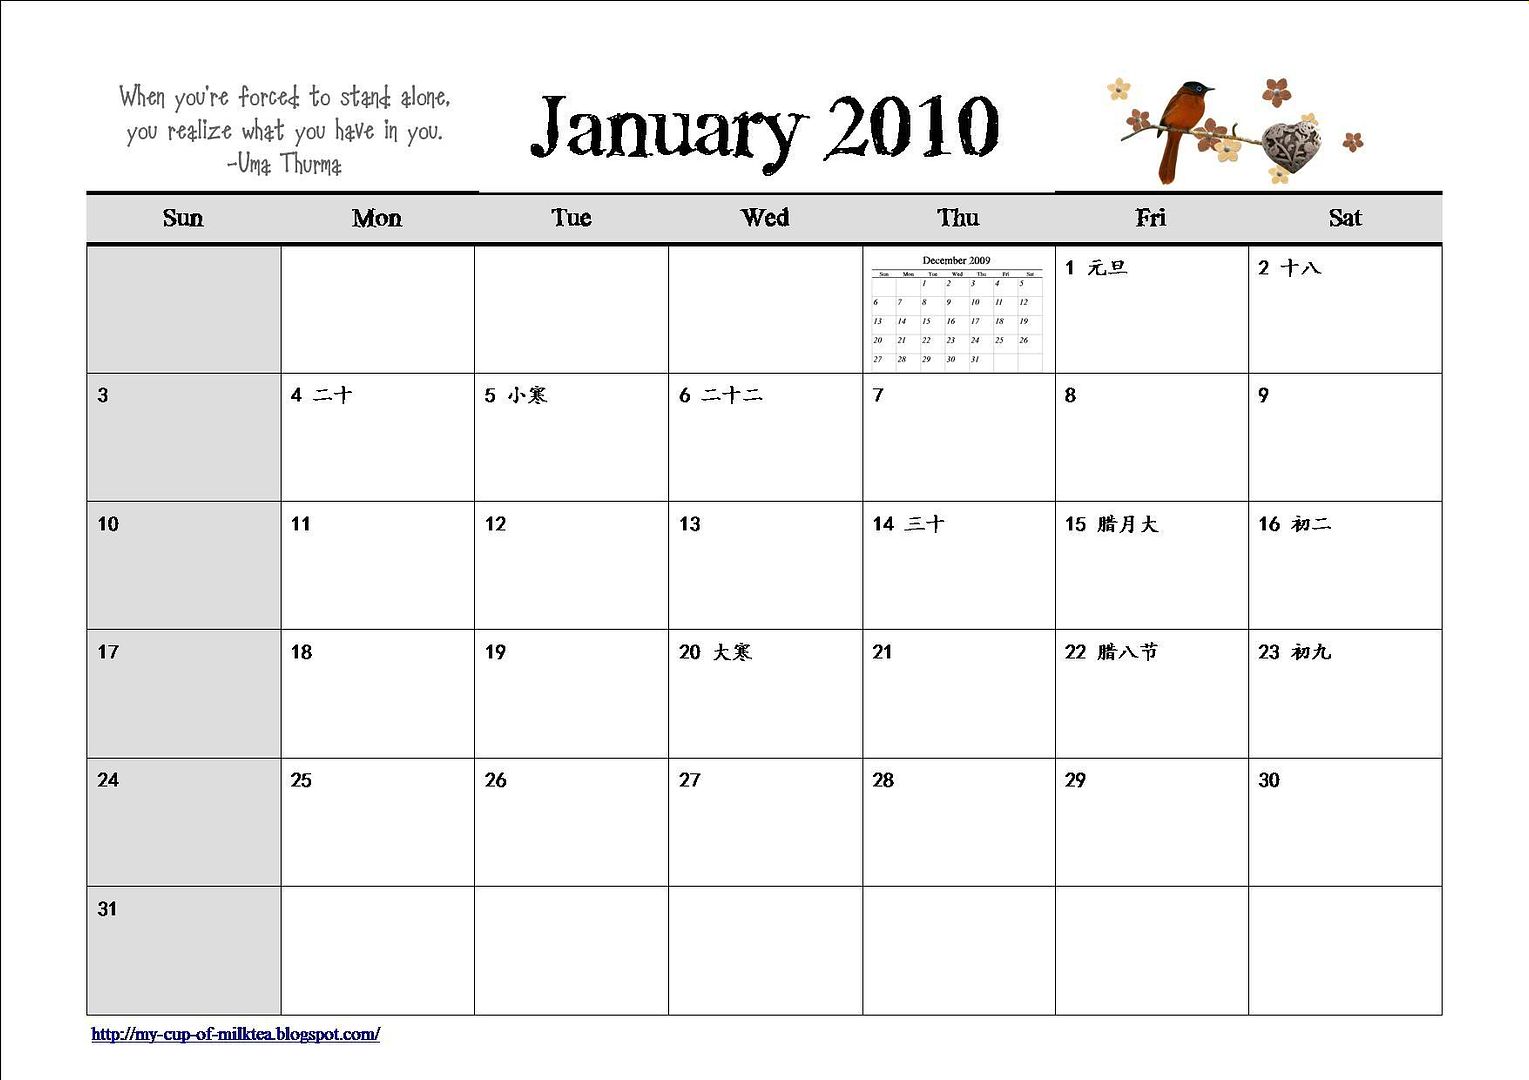 http://feedproxy.google.com/~r/MyCupOfMilktea/~3/Kdfrgemky6s/2010-monthly-planner.html